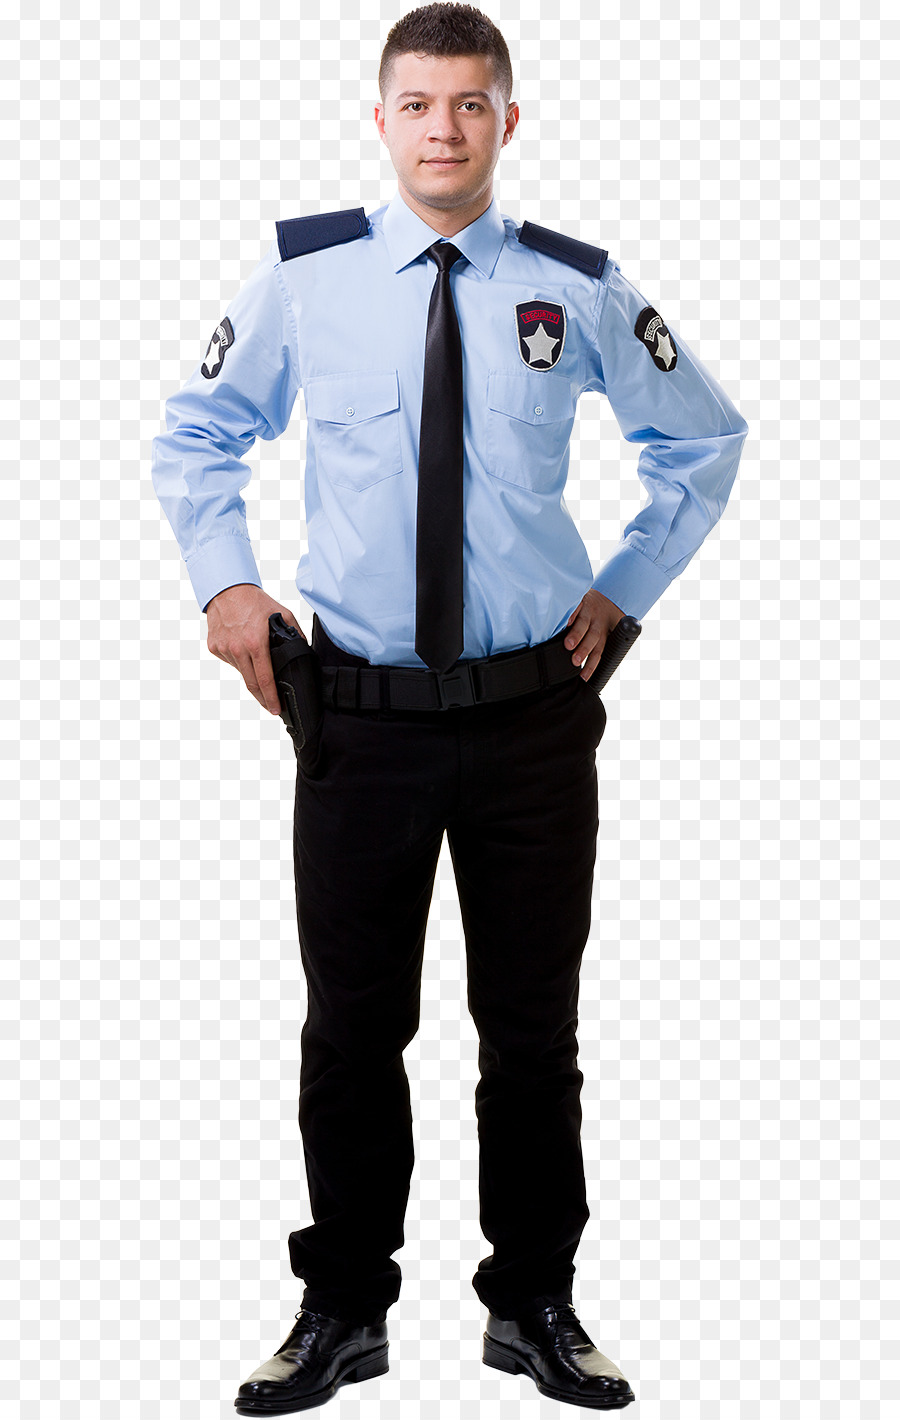 Police Dress PNG Images, Police Dress Clipart Free Download